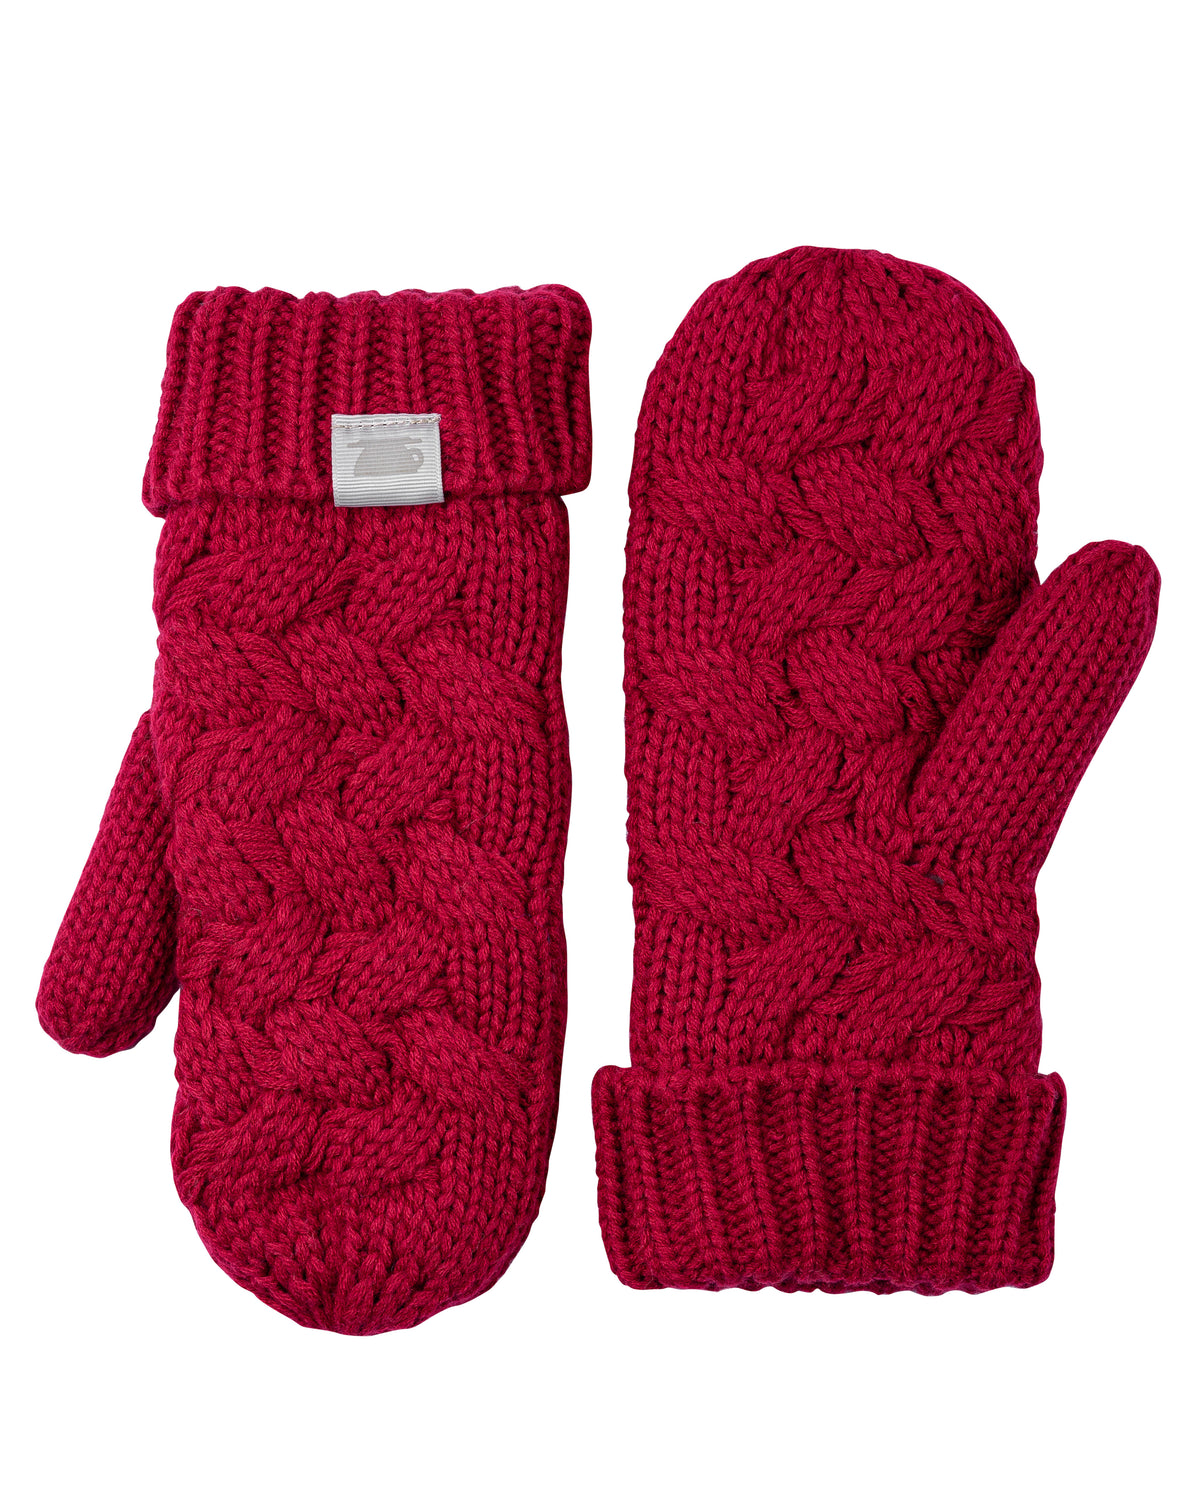 Twisted Texture Cozy Mittens - Deep Red